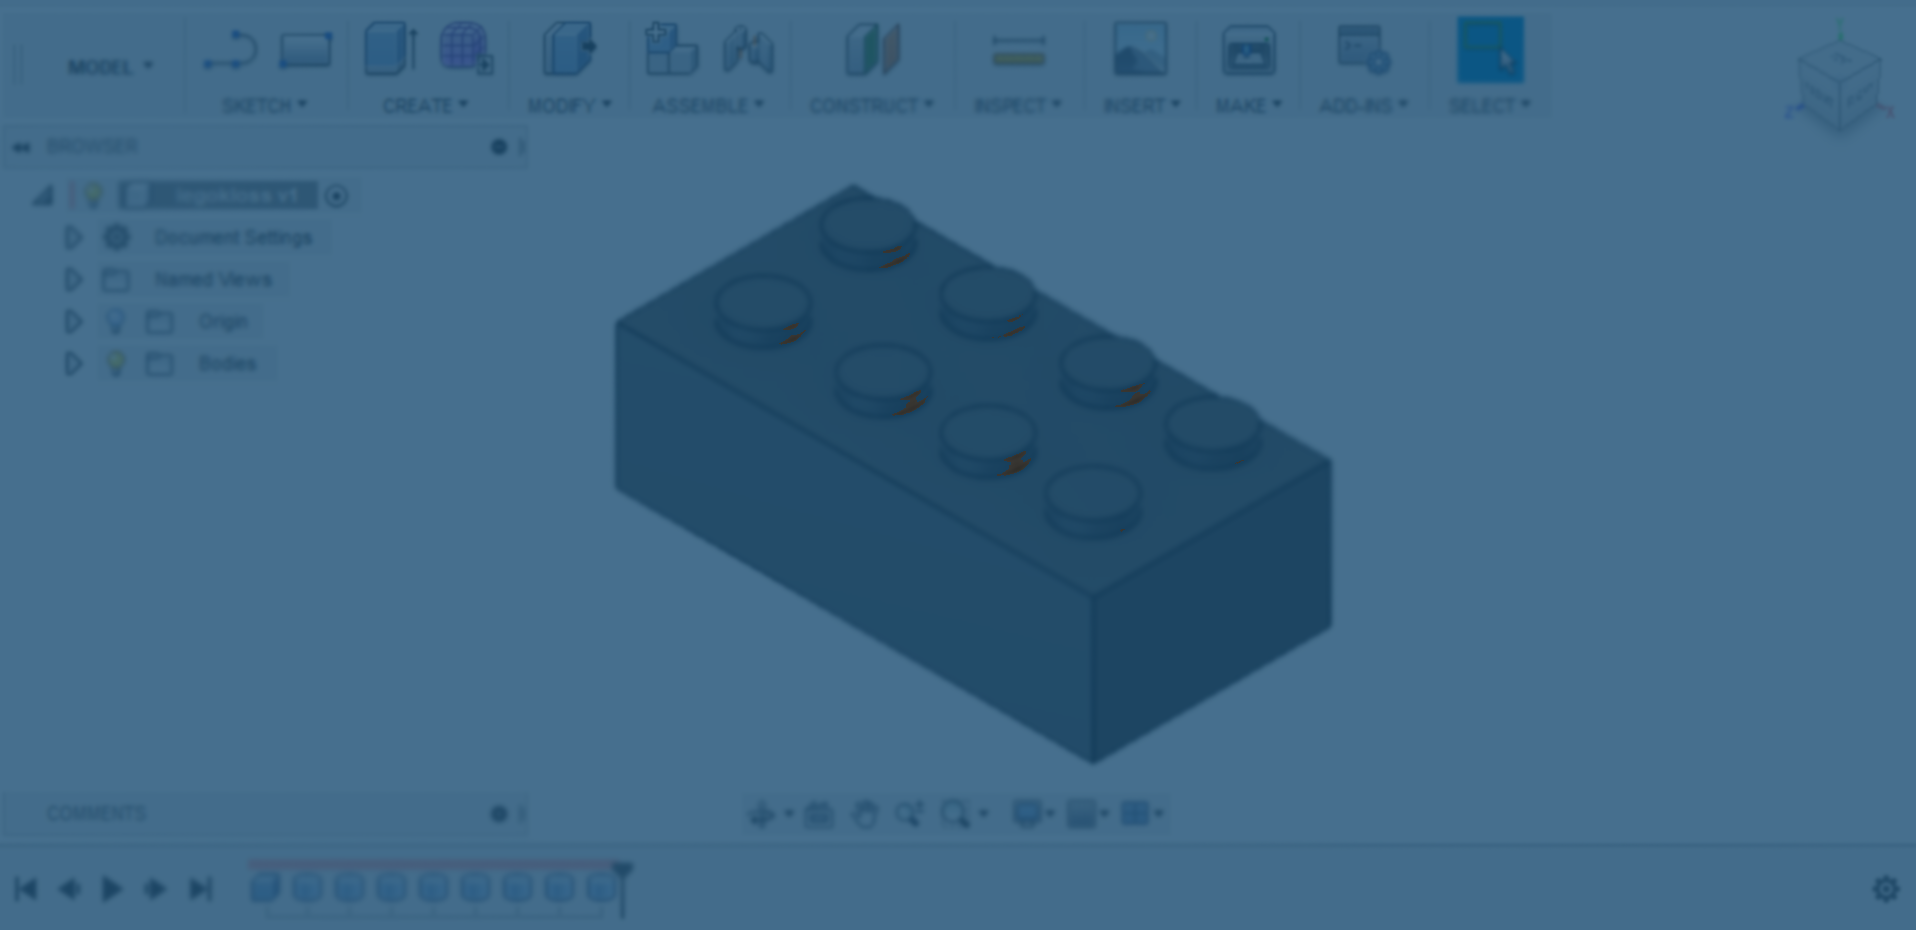 A screenshot of a 3D modelled LEGO brick in the 3D modelling program Fusion 360